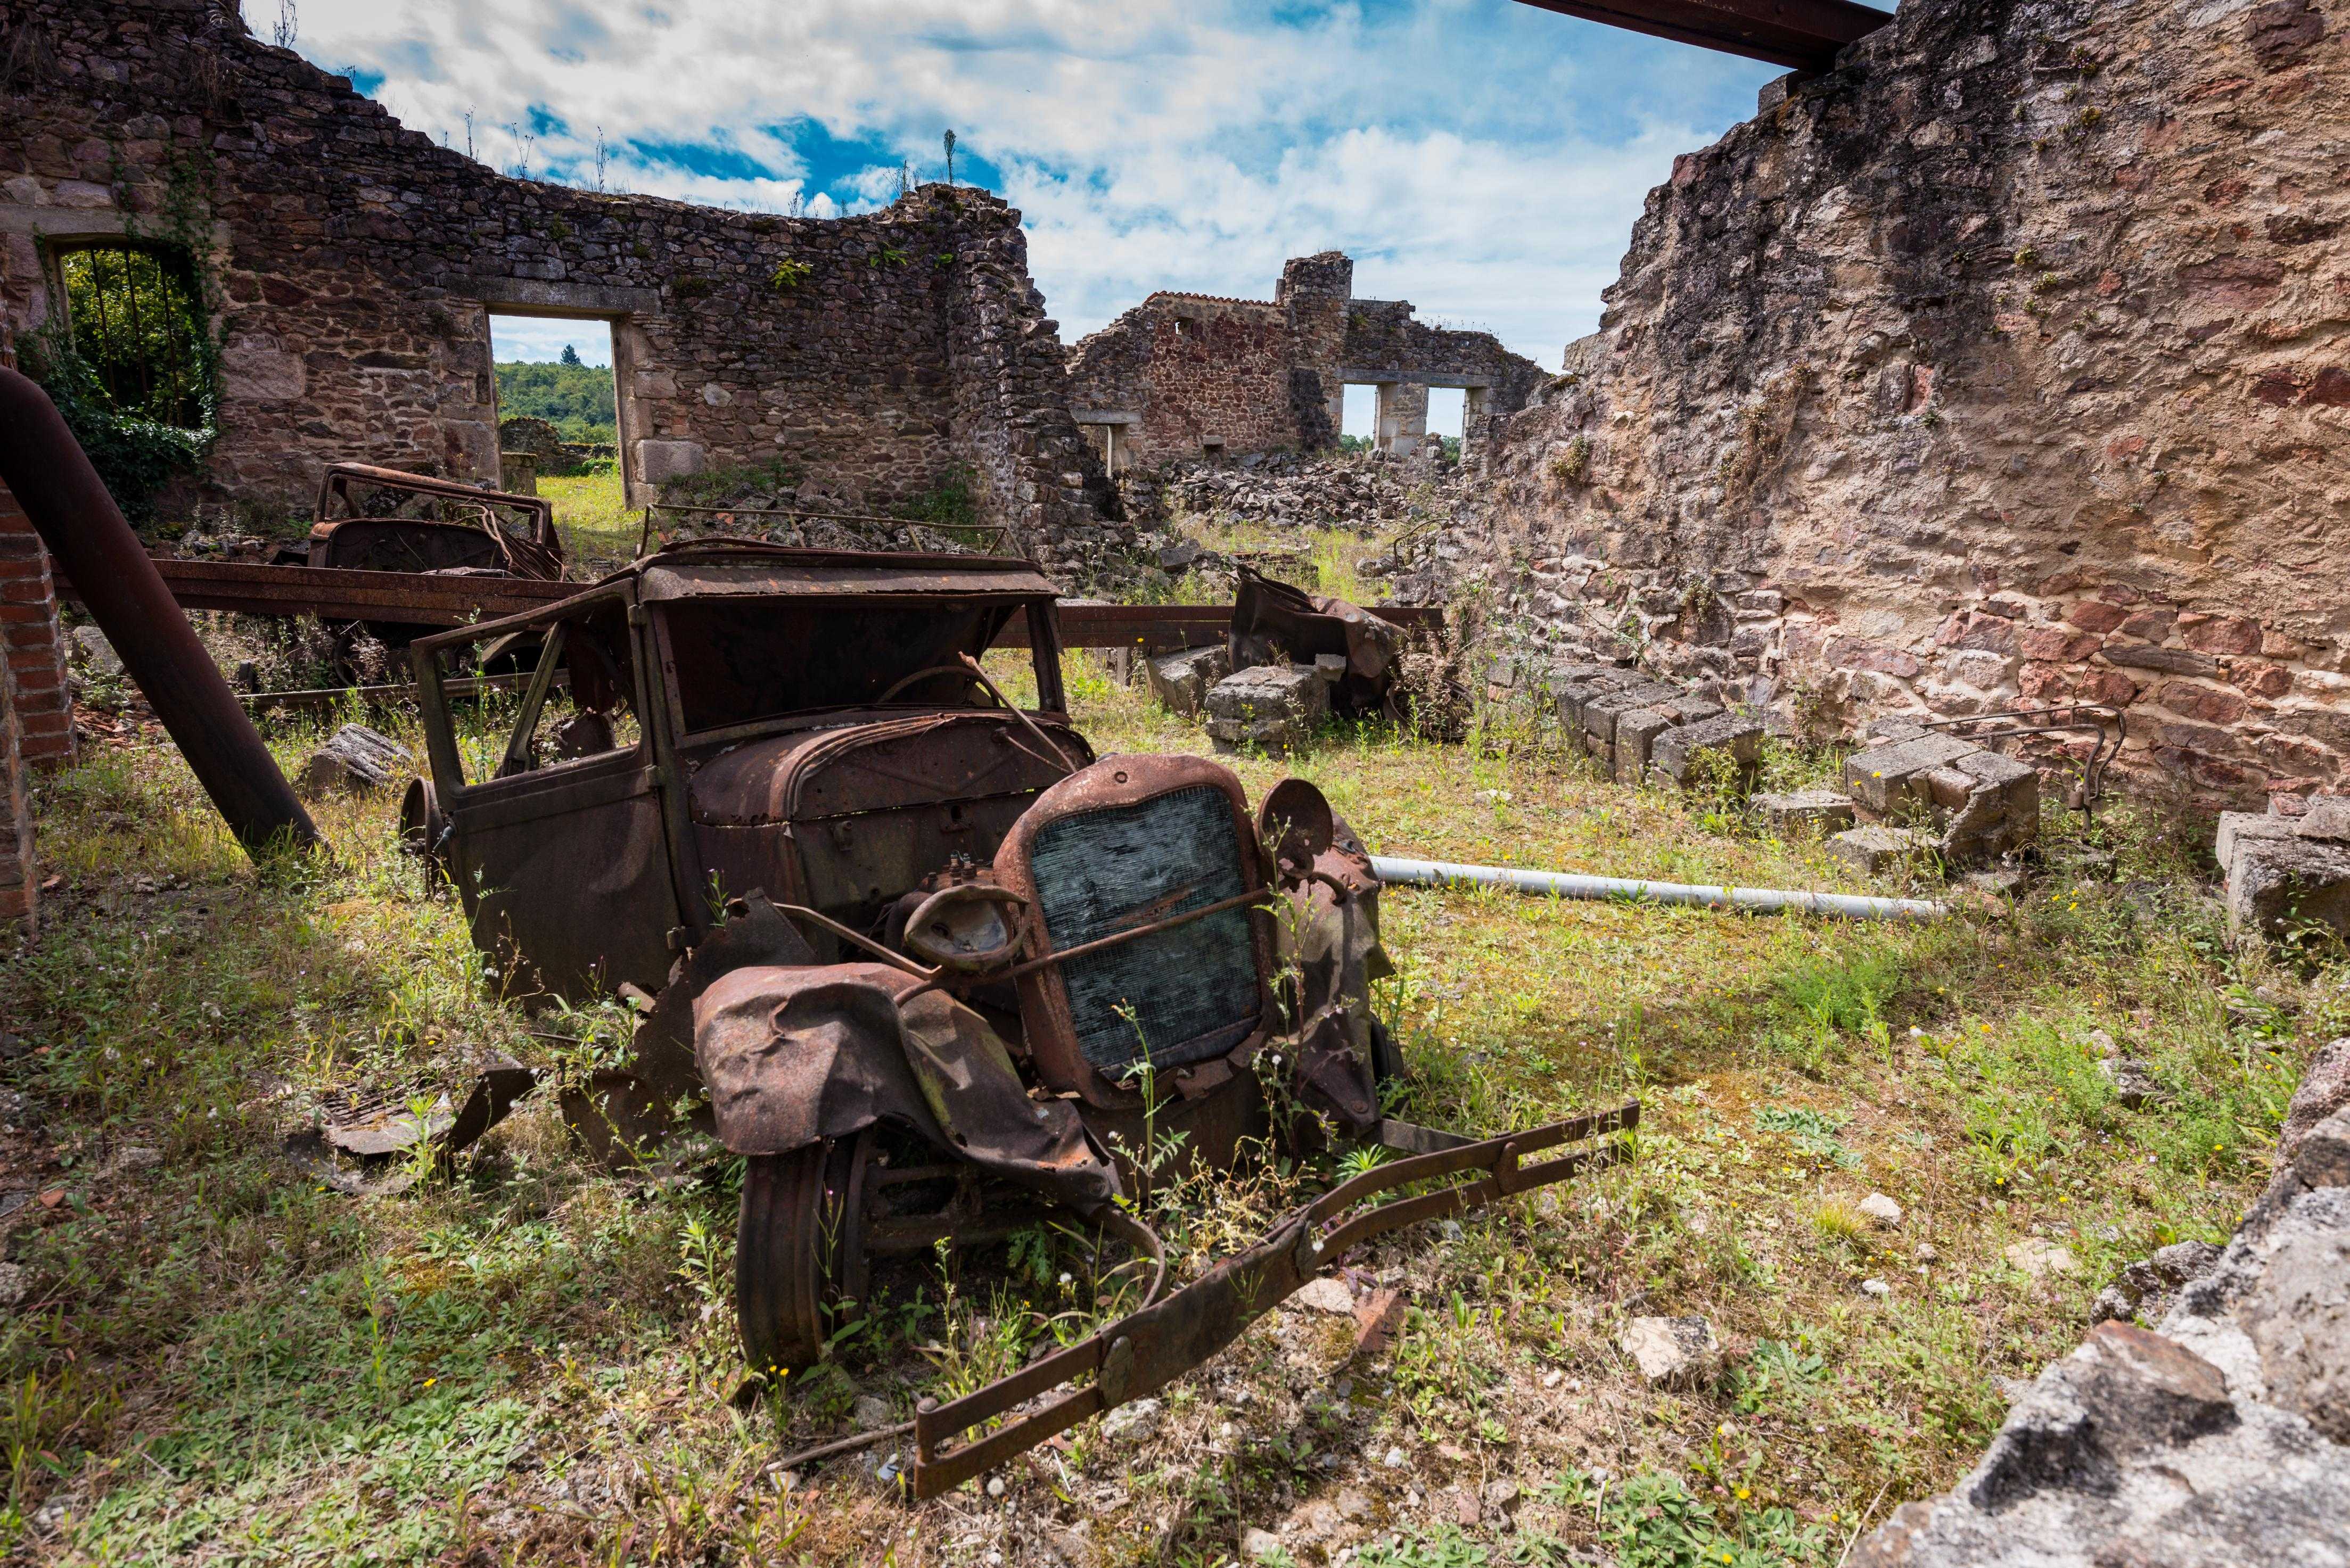 Abandoned: Five Ghost Towns Worth Visiting » Explorersweb